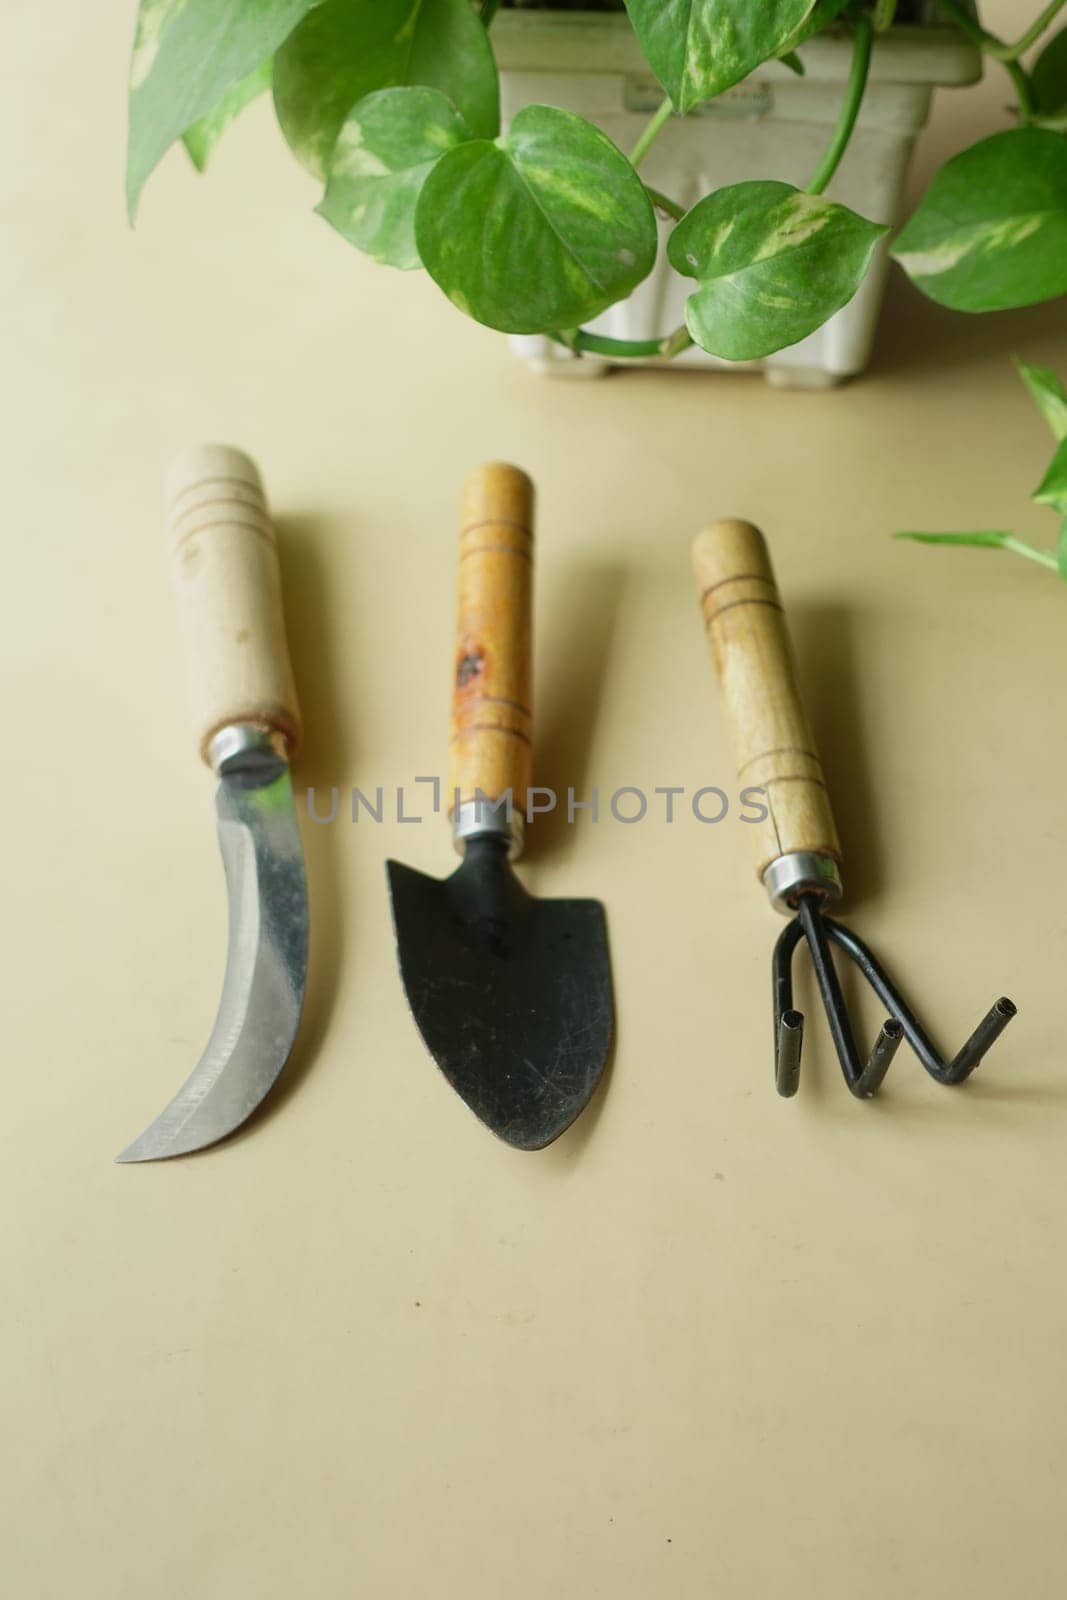 gardening tools and plant on a table with copy space .